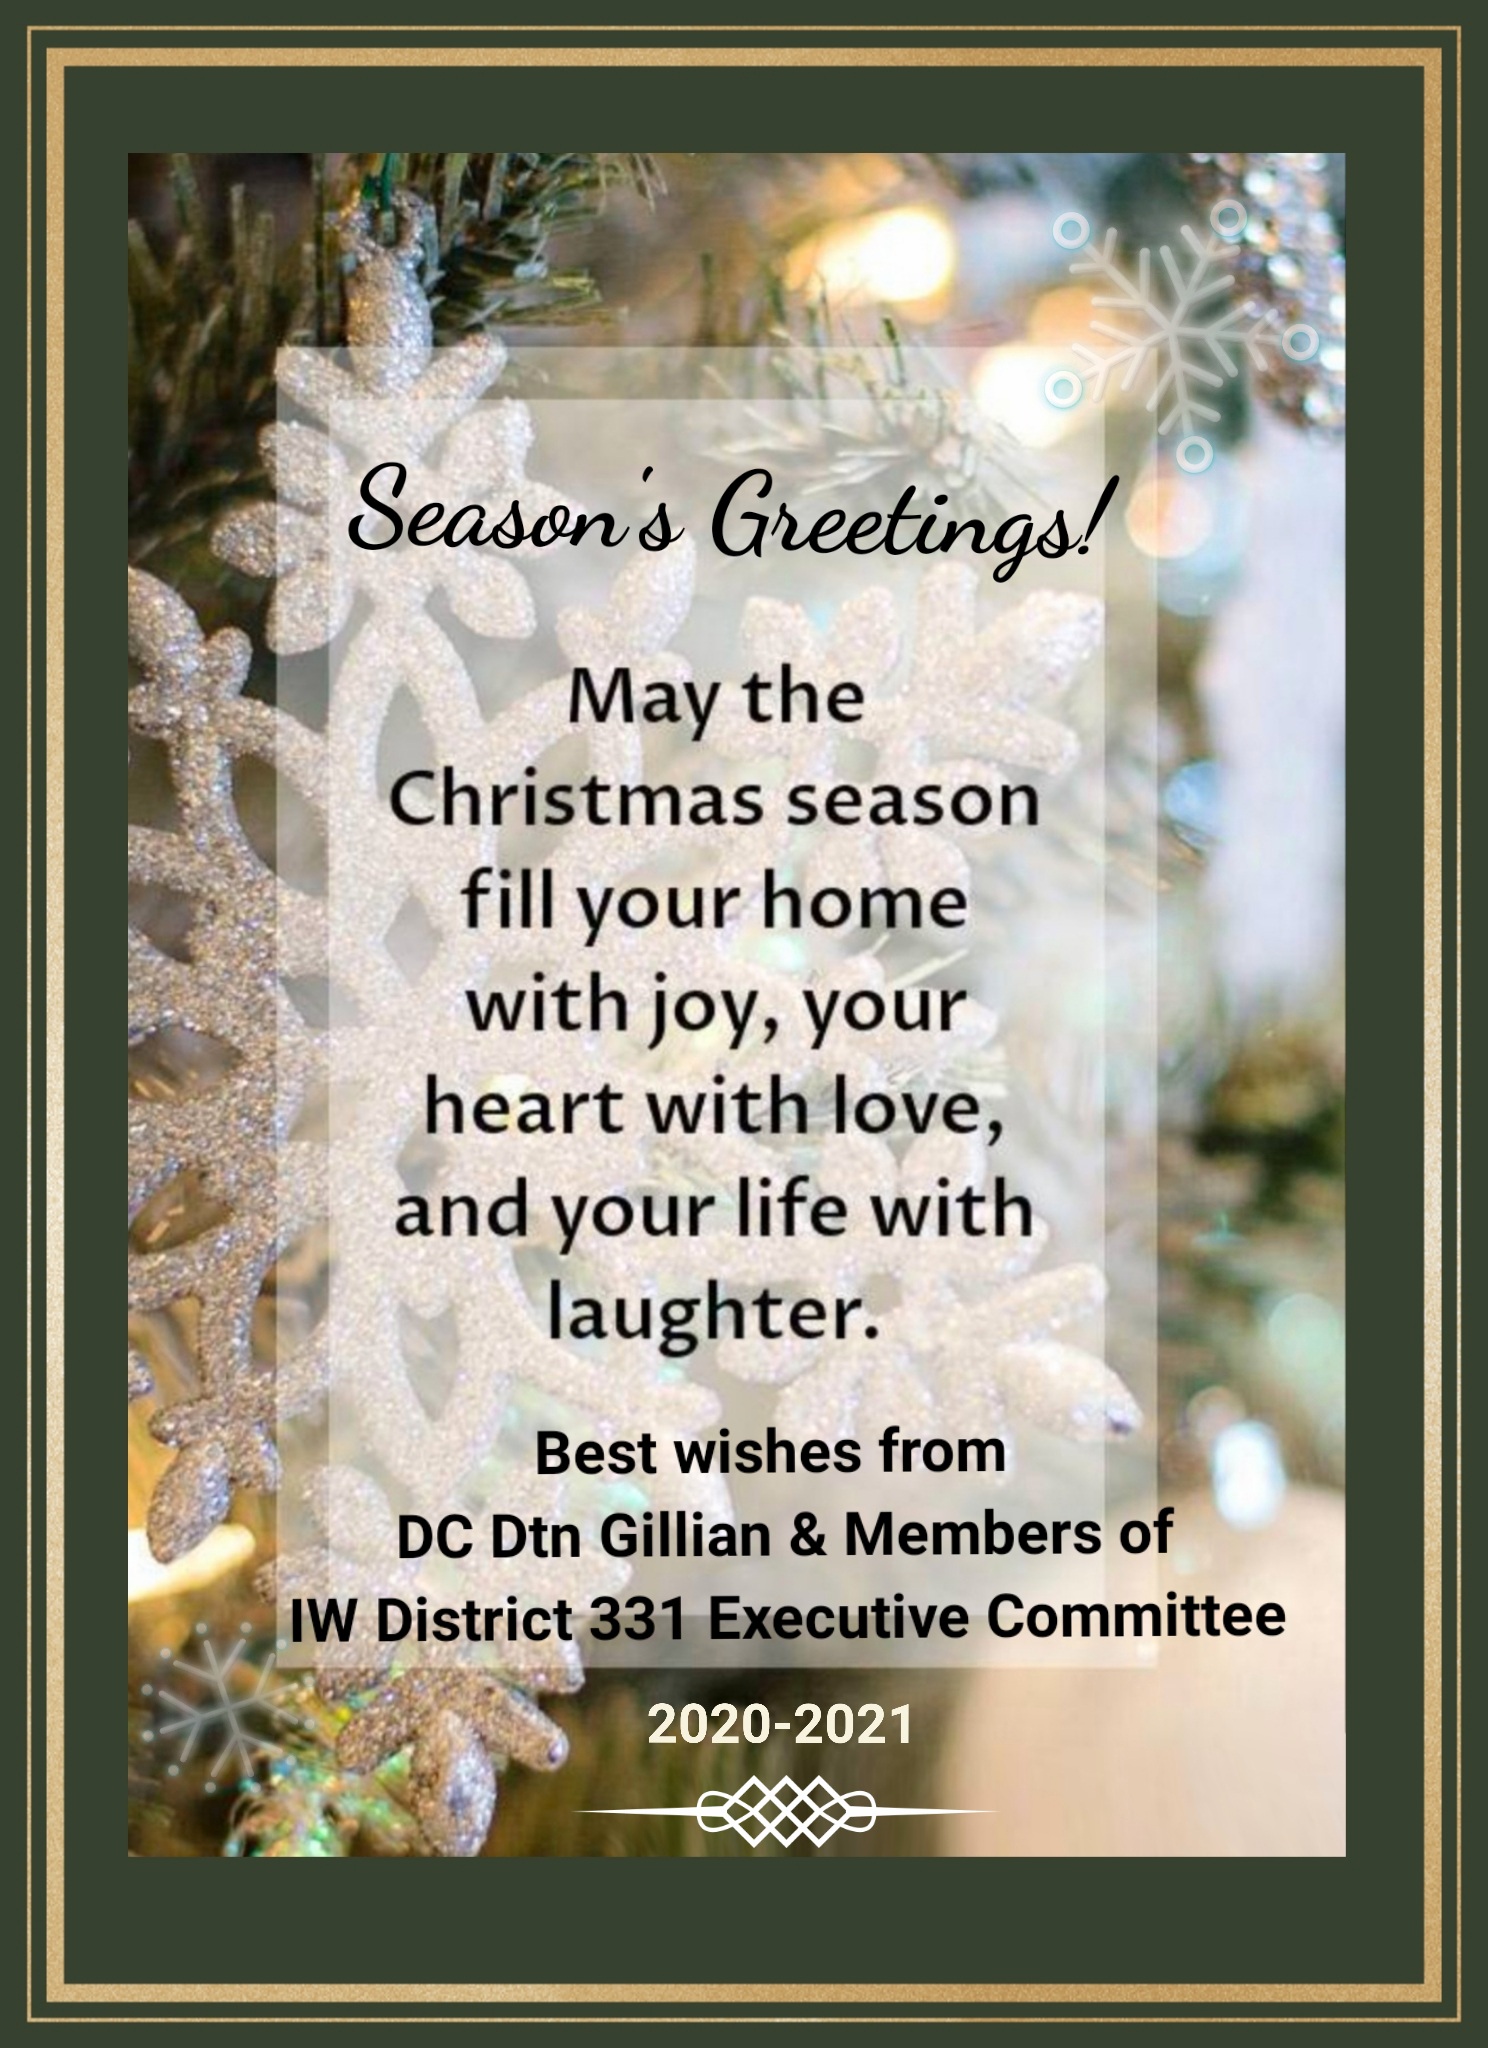 24 Dec 2020. Season's Greetings from District Executive Committee.